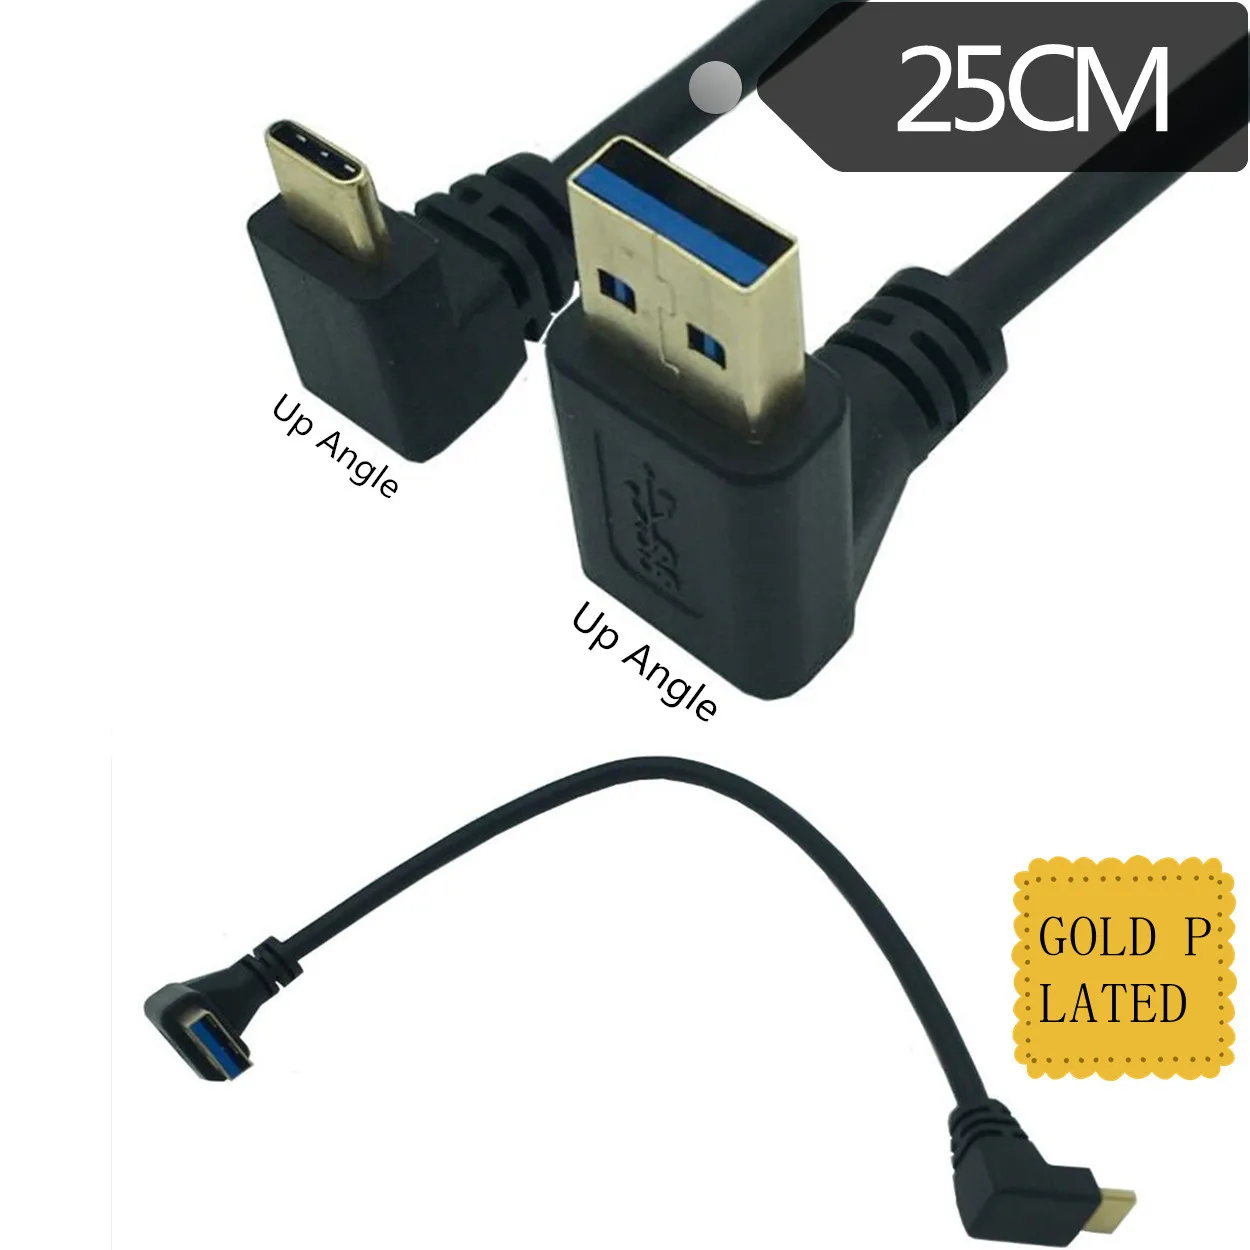 

Up & Down & Left & Right Angled 90 Degree Micro USB Male to USB male Data Charge connector Cable 0.25m for mobile phone Tablet